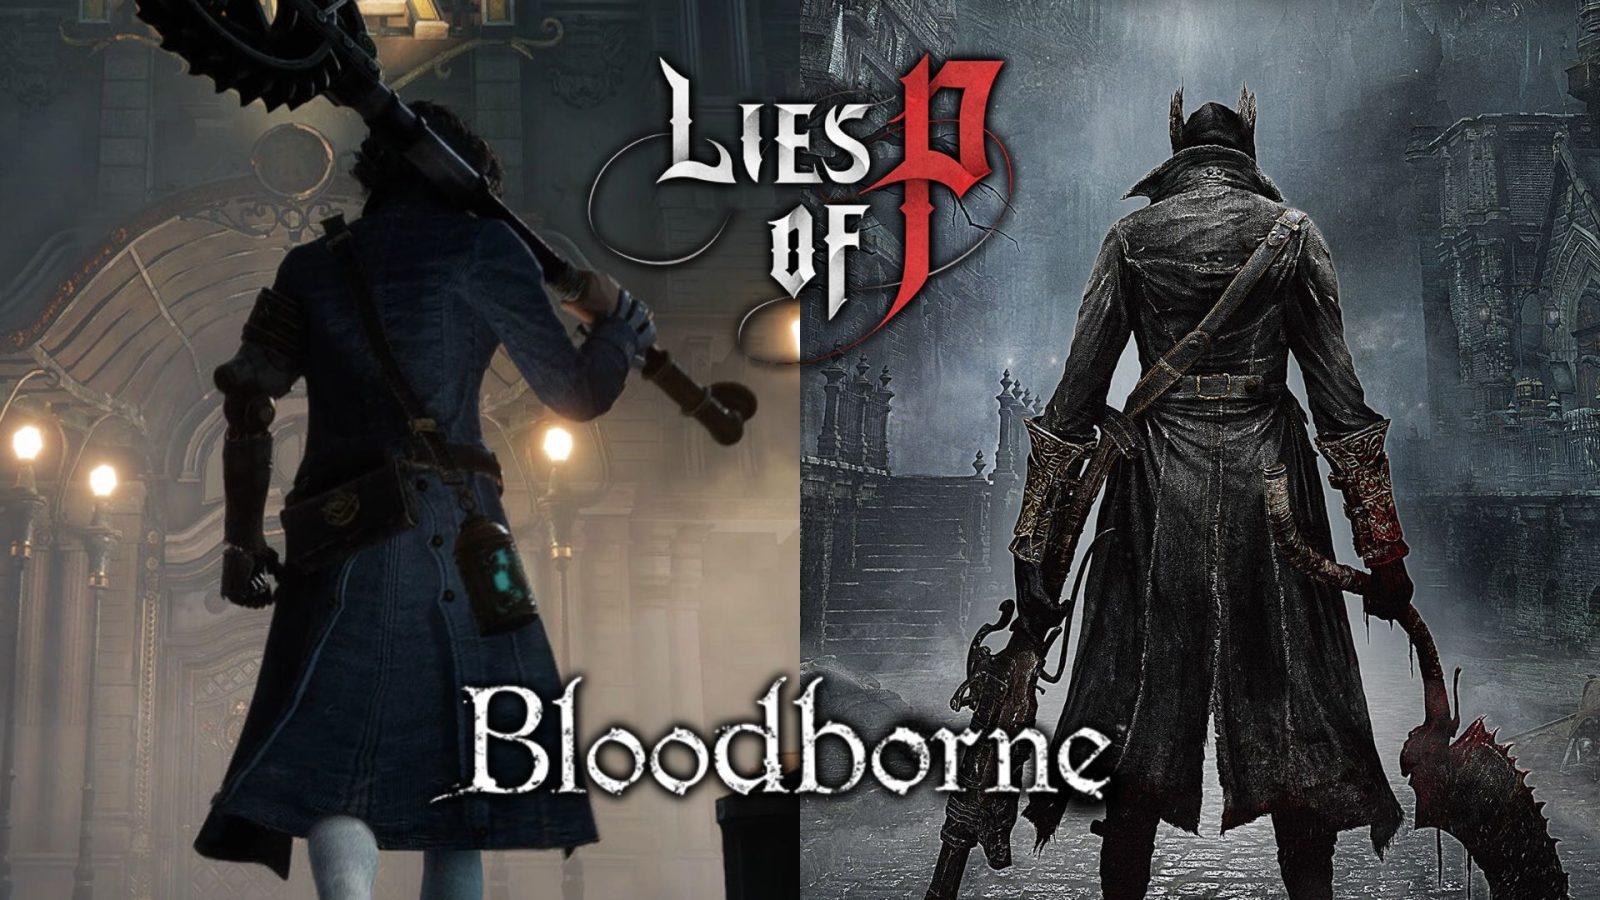 artwork for lies of p and bloodborne